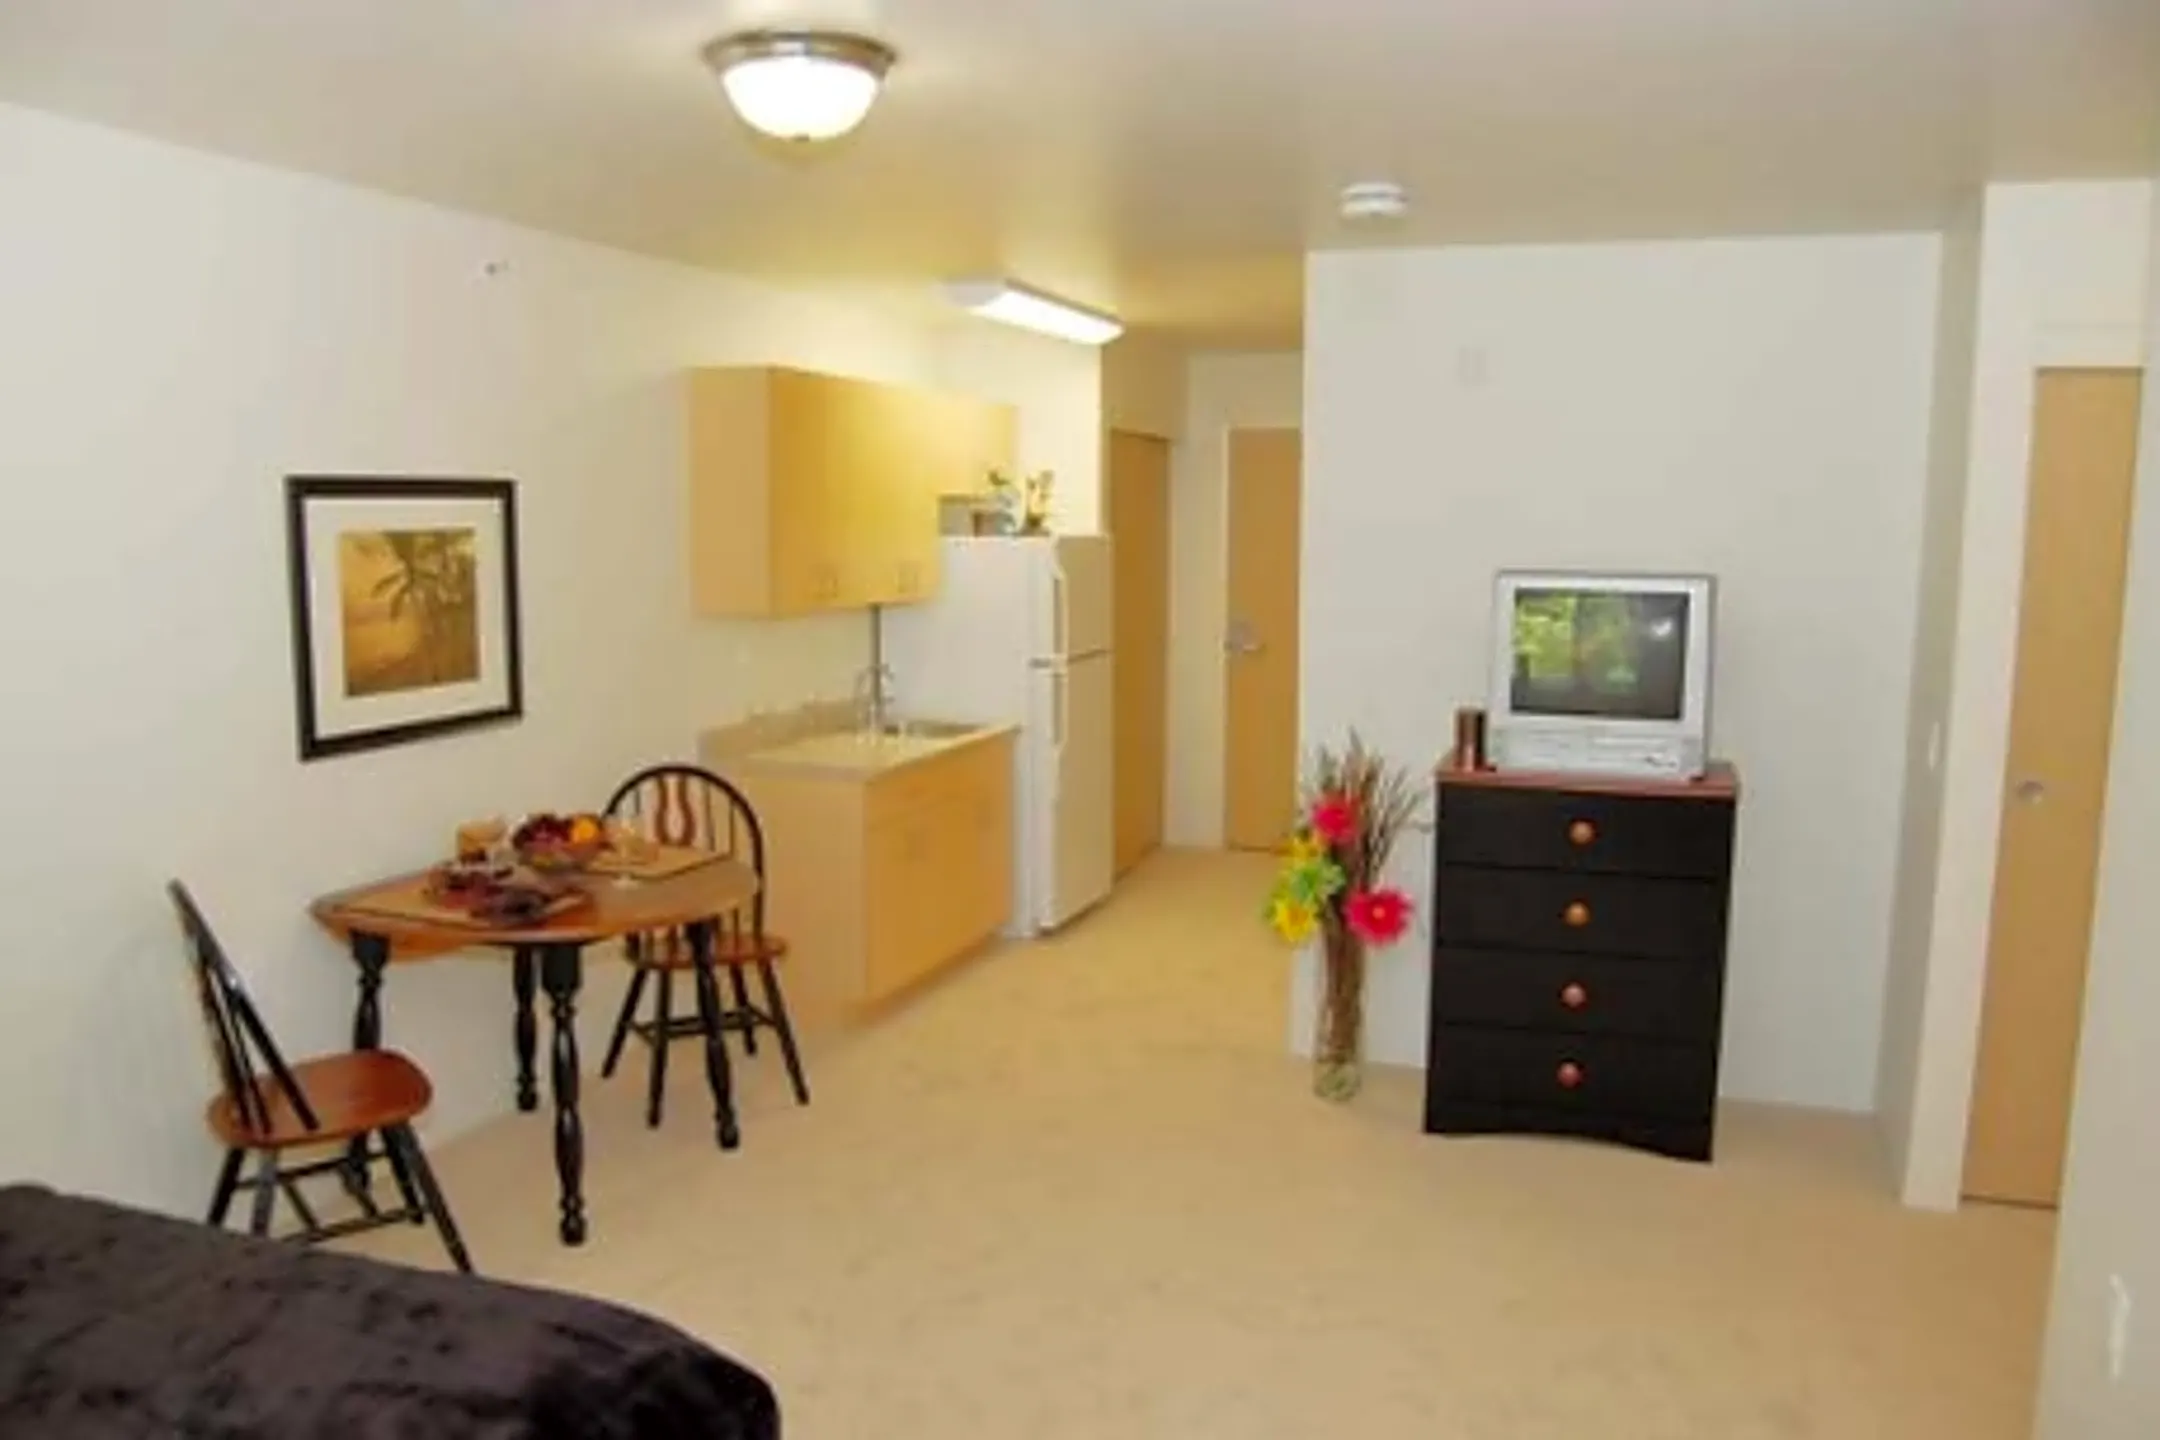 Maple Suites - Dover, NH 03820